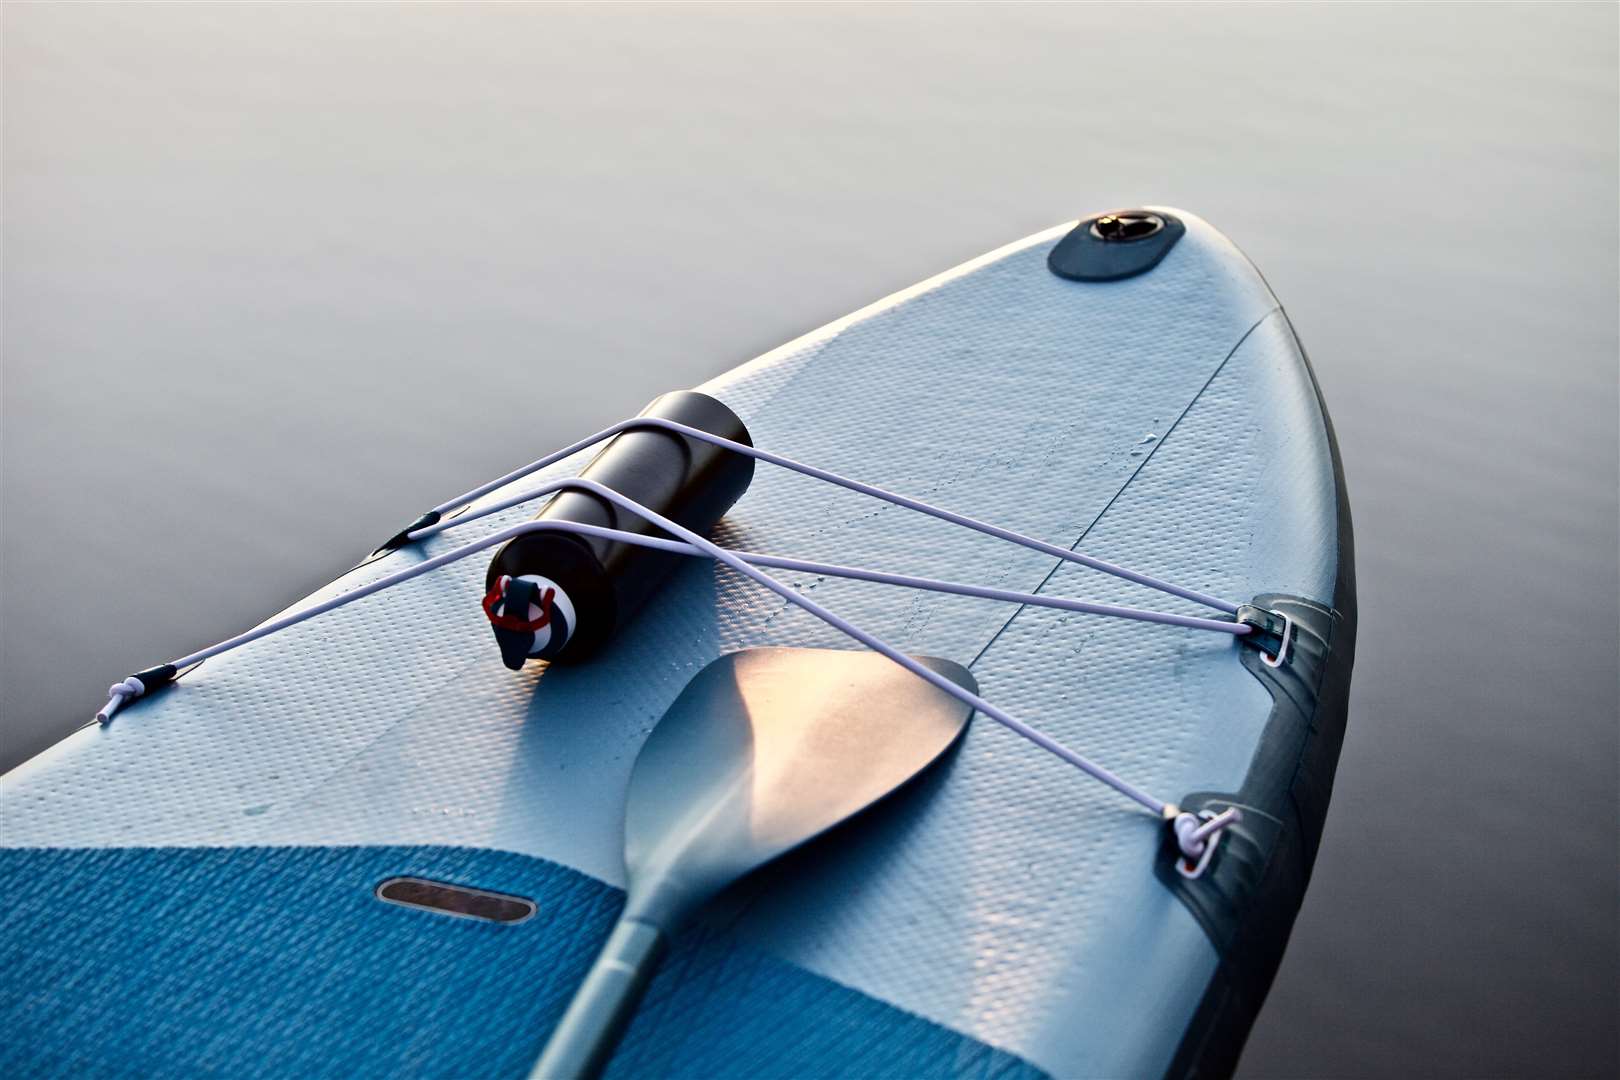 The paddleboarder made it safely to shore. Picture: Adobe Stock Images